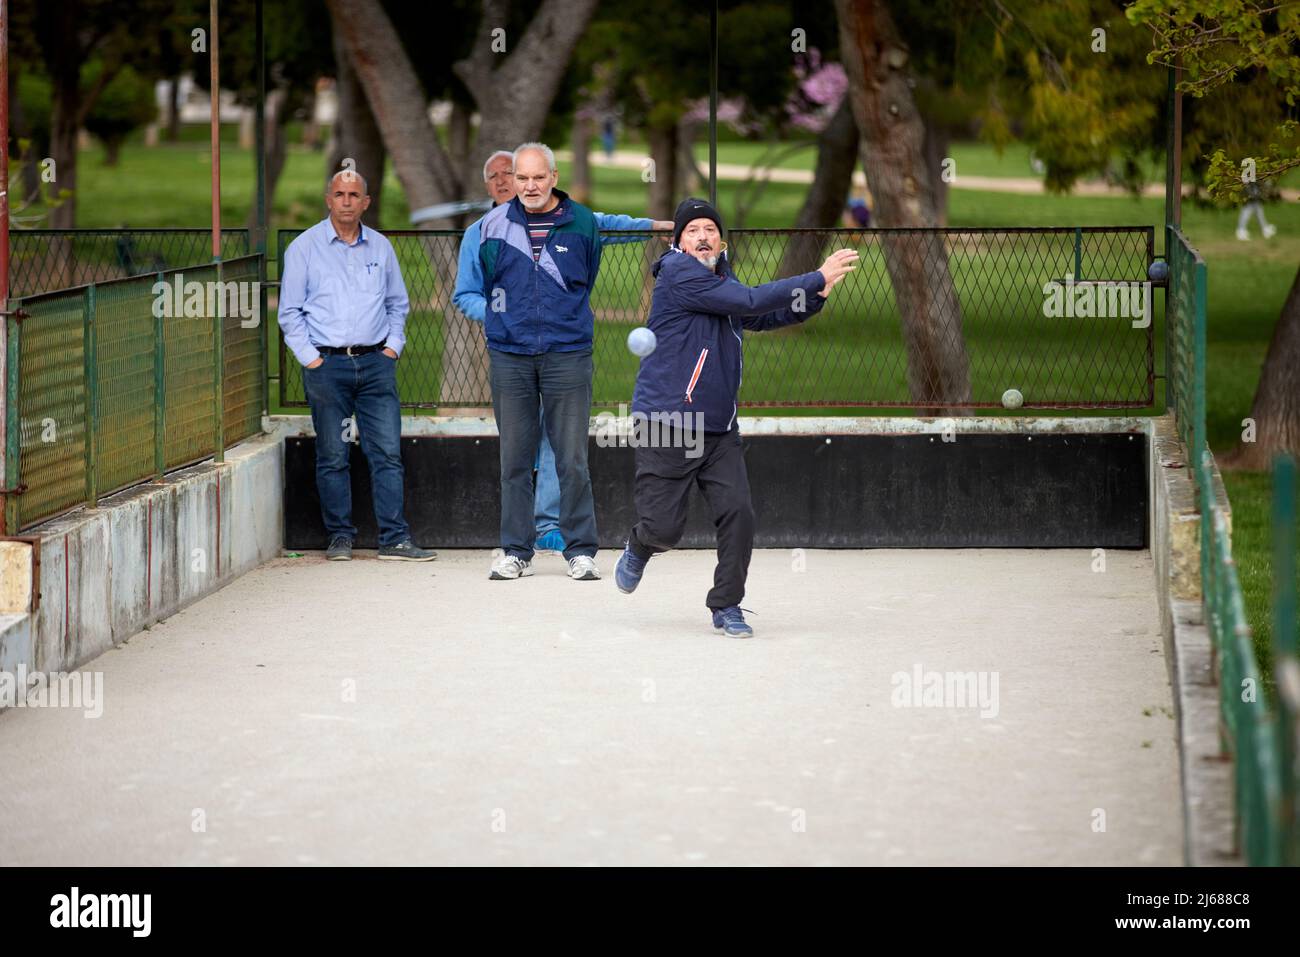 The city of Split in Croatia in the region of Dalmatia, older gentleman playing bocce ball in a public park Stock Photo